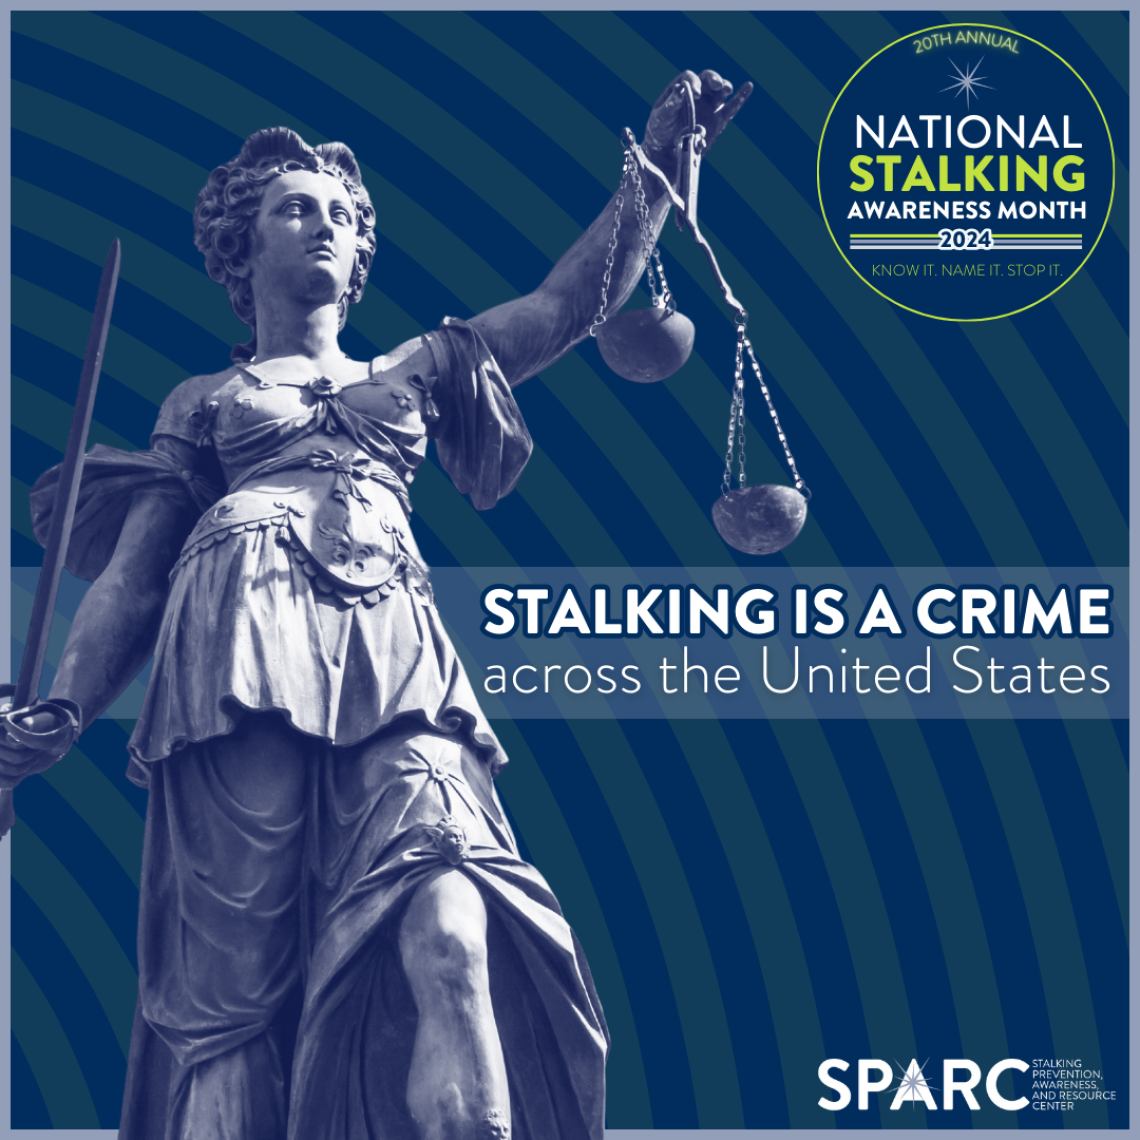 A statue of 'Justice' with text that reads 'Stalking is a crime across the United States.'